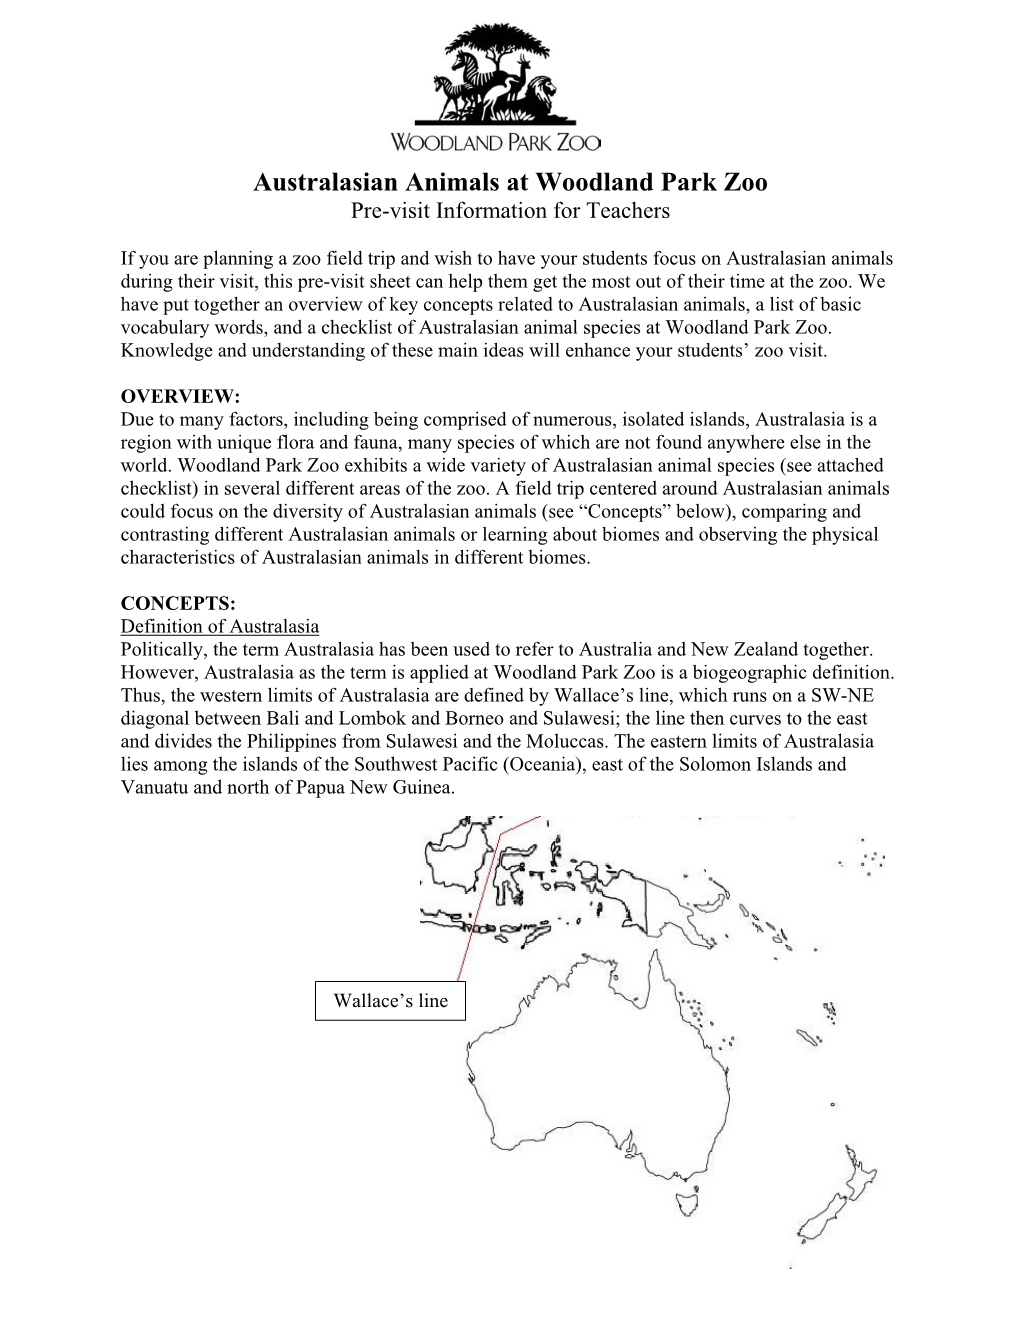 Australasian Animals at Woodland Park Zoo Pre-Visit Information for Teachers